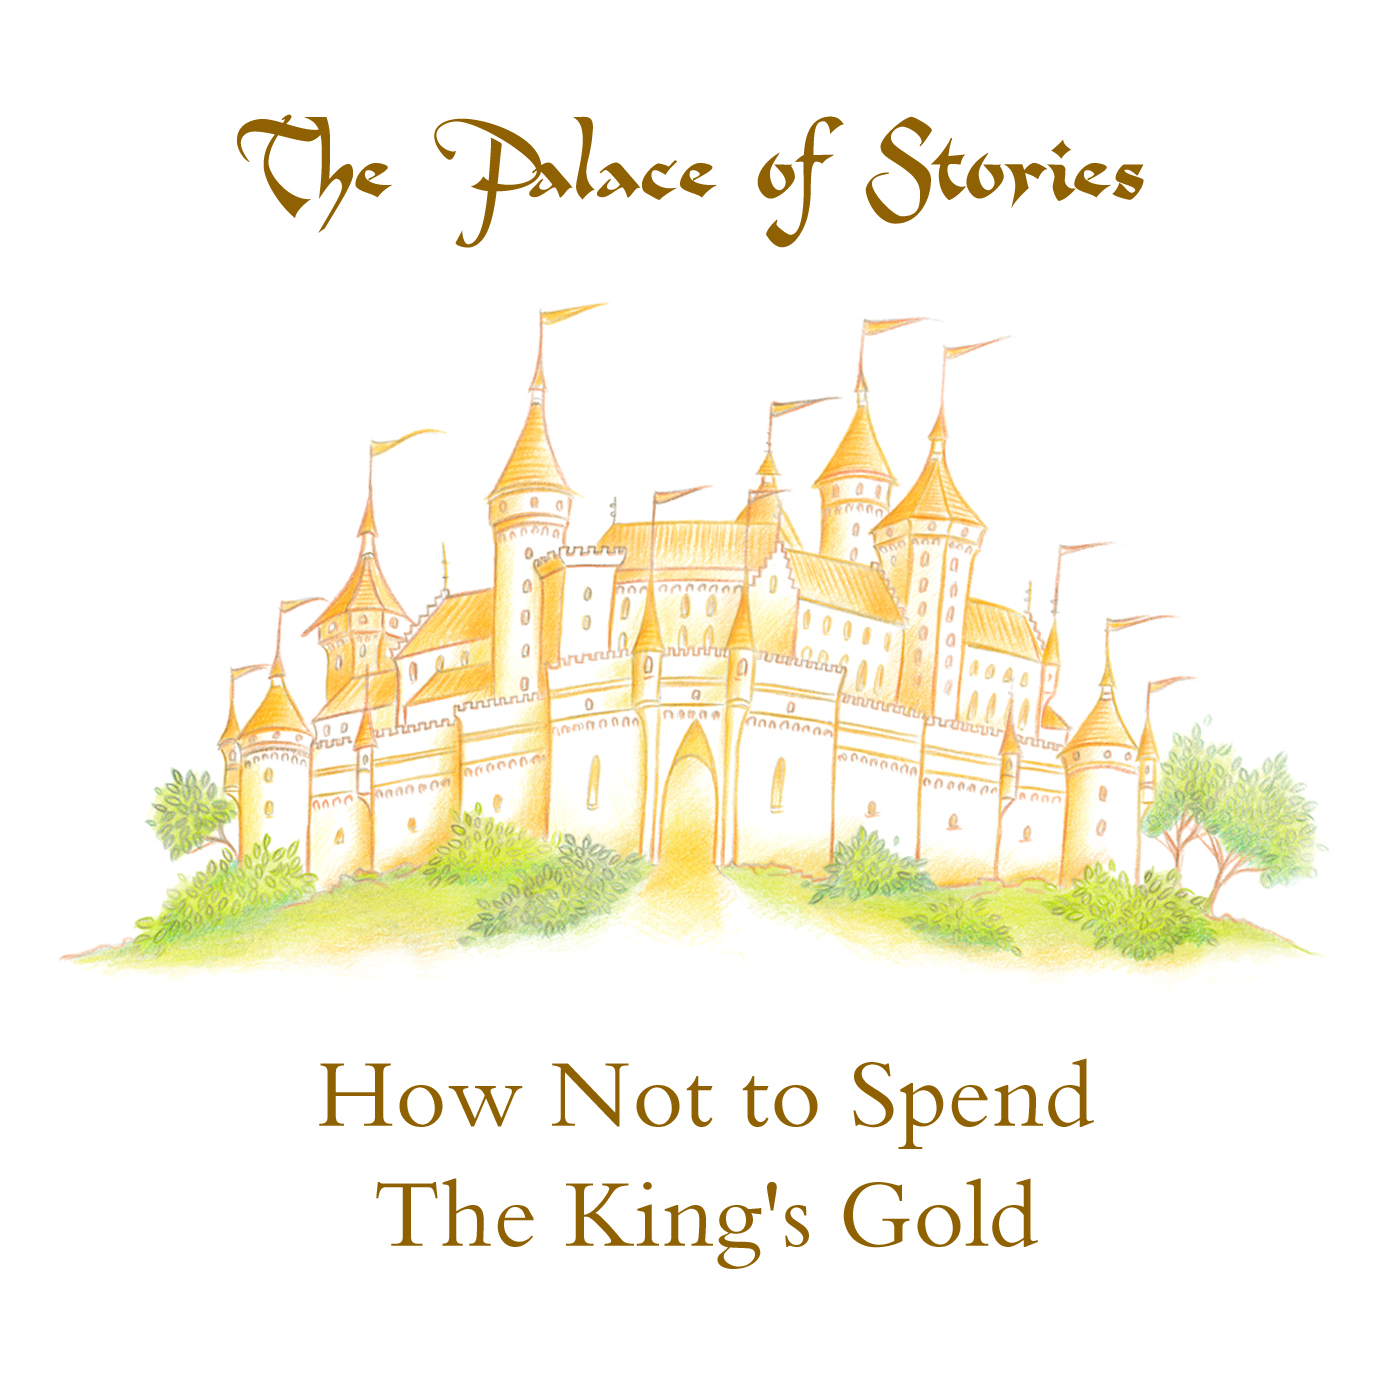 How Not To Spend The King’s Gold